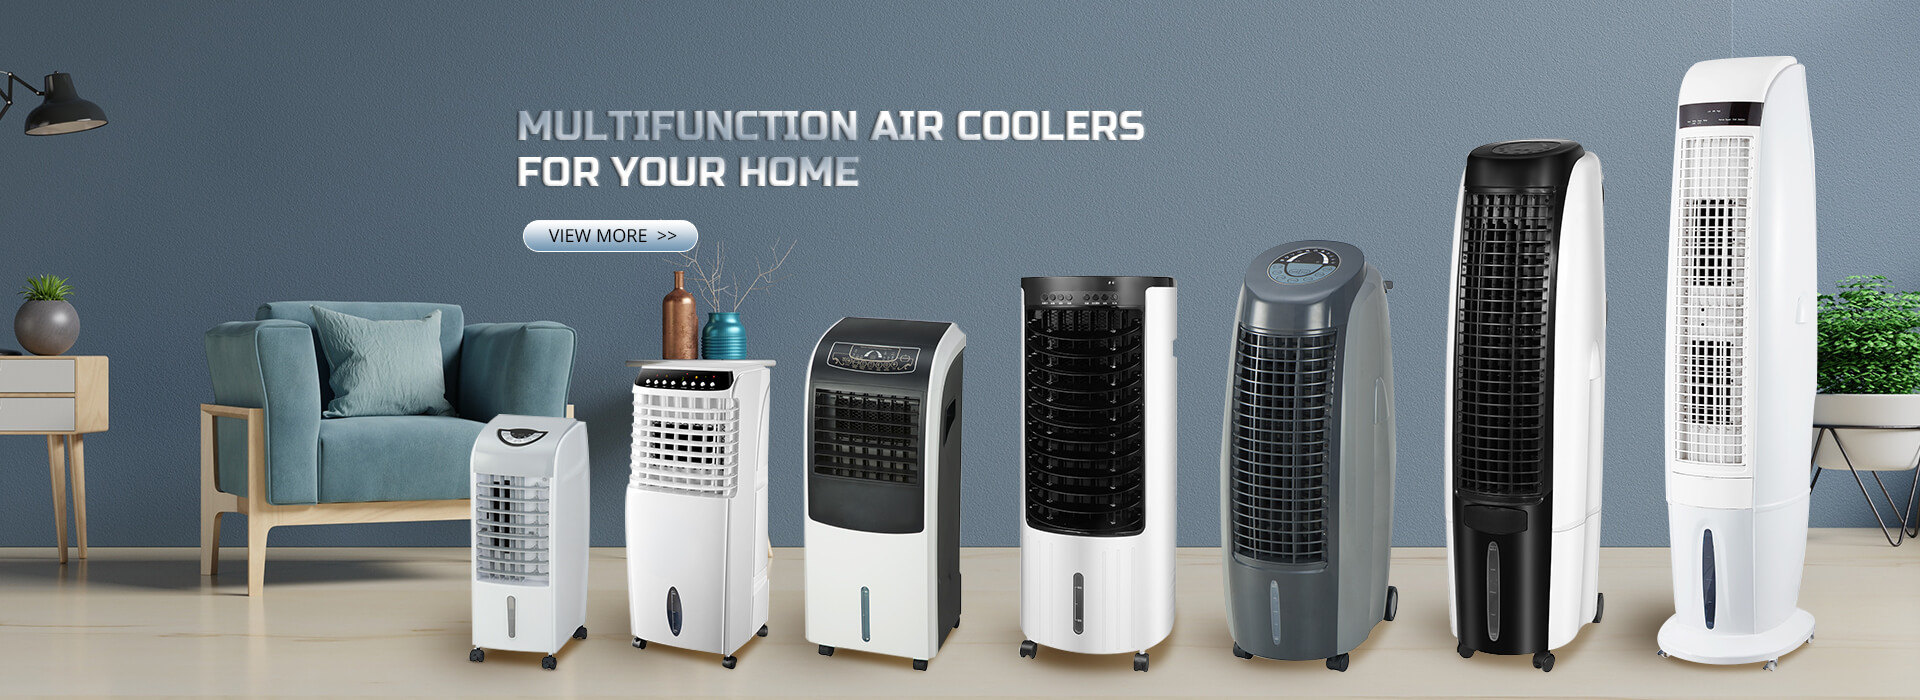 Multifunction Air Coolers Manufacturer